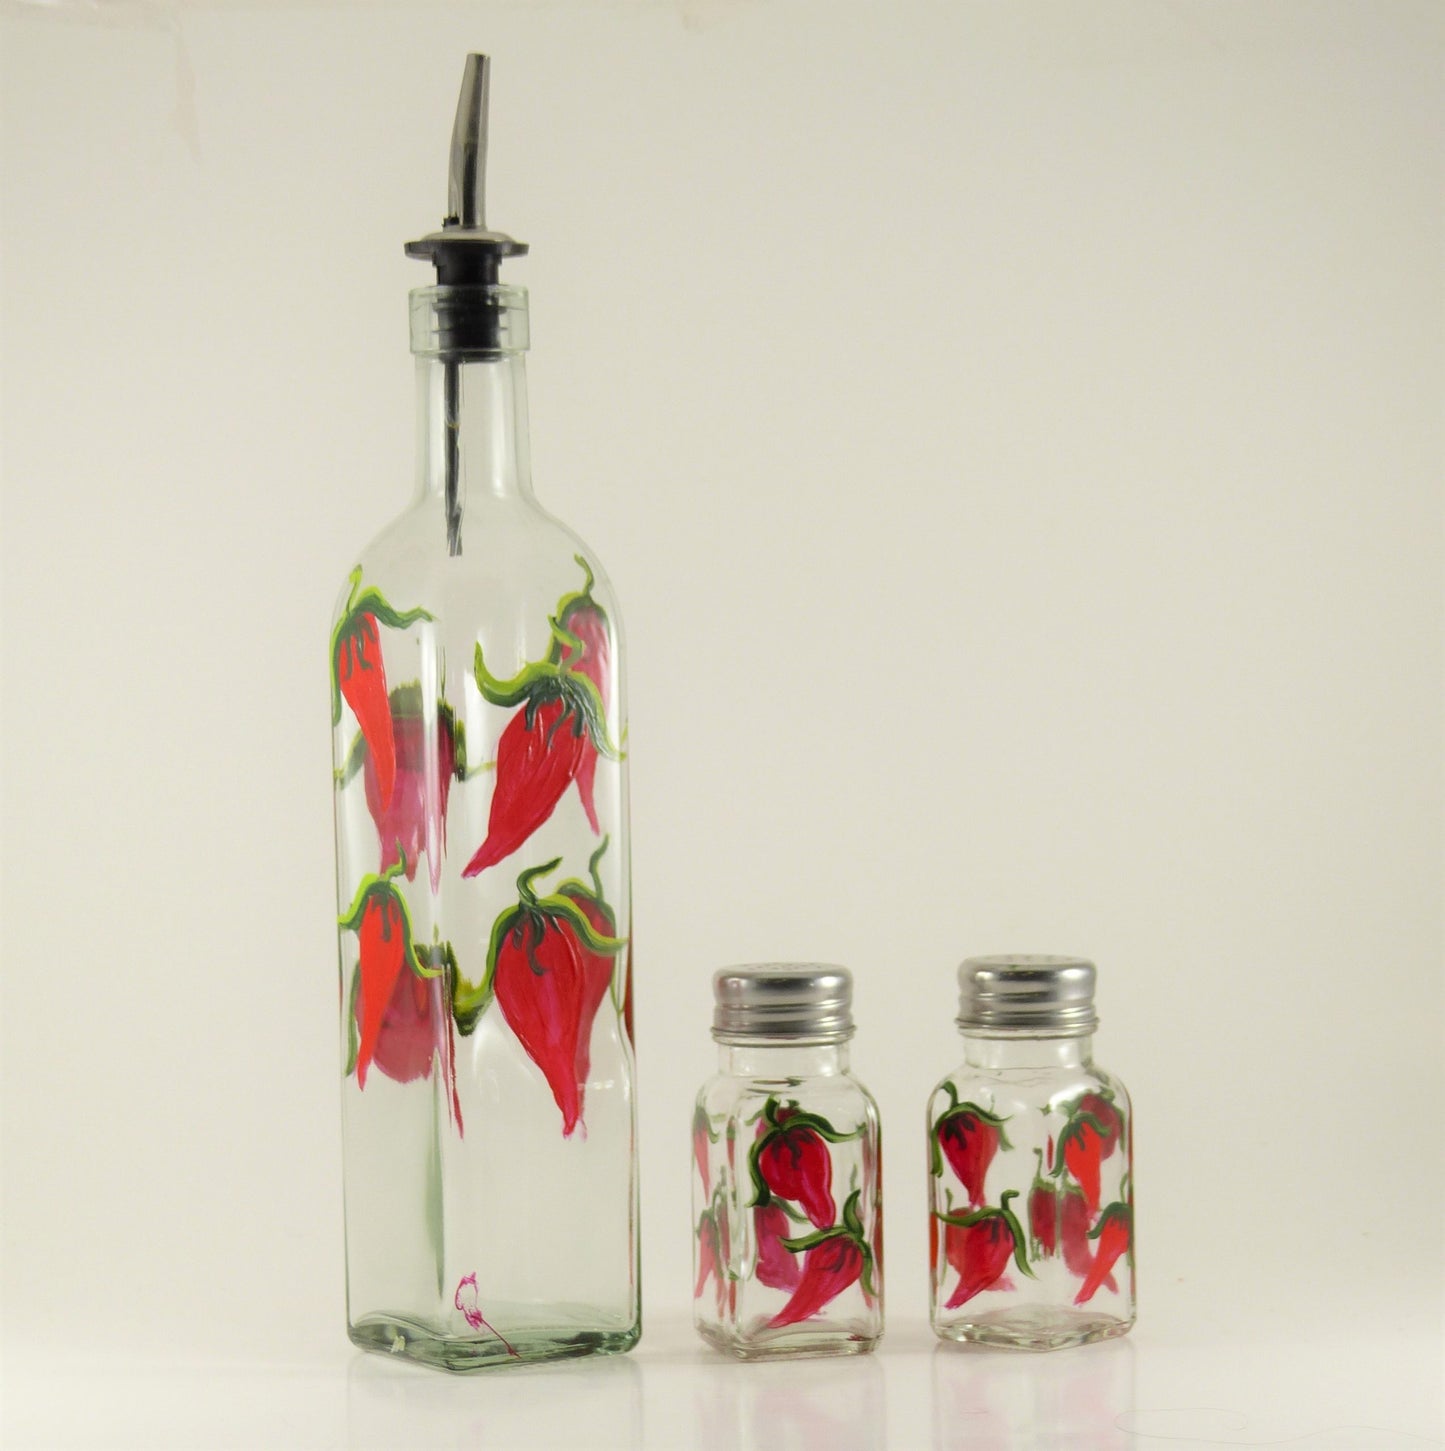 Hot Peppers Hand Painted Oil, Salt, Pepper Set by Helene Canberg